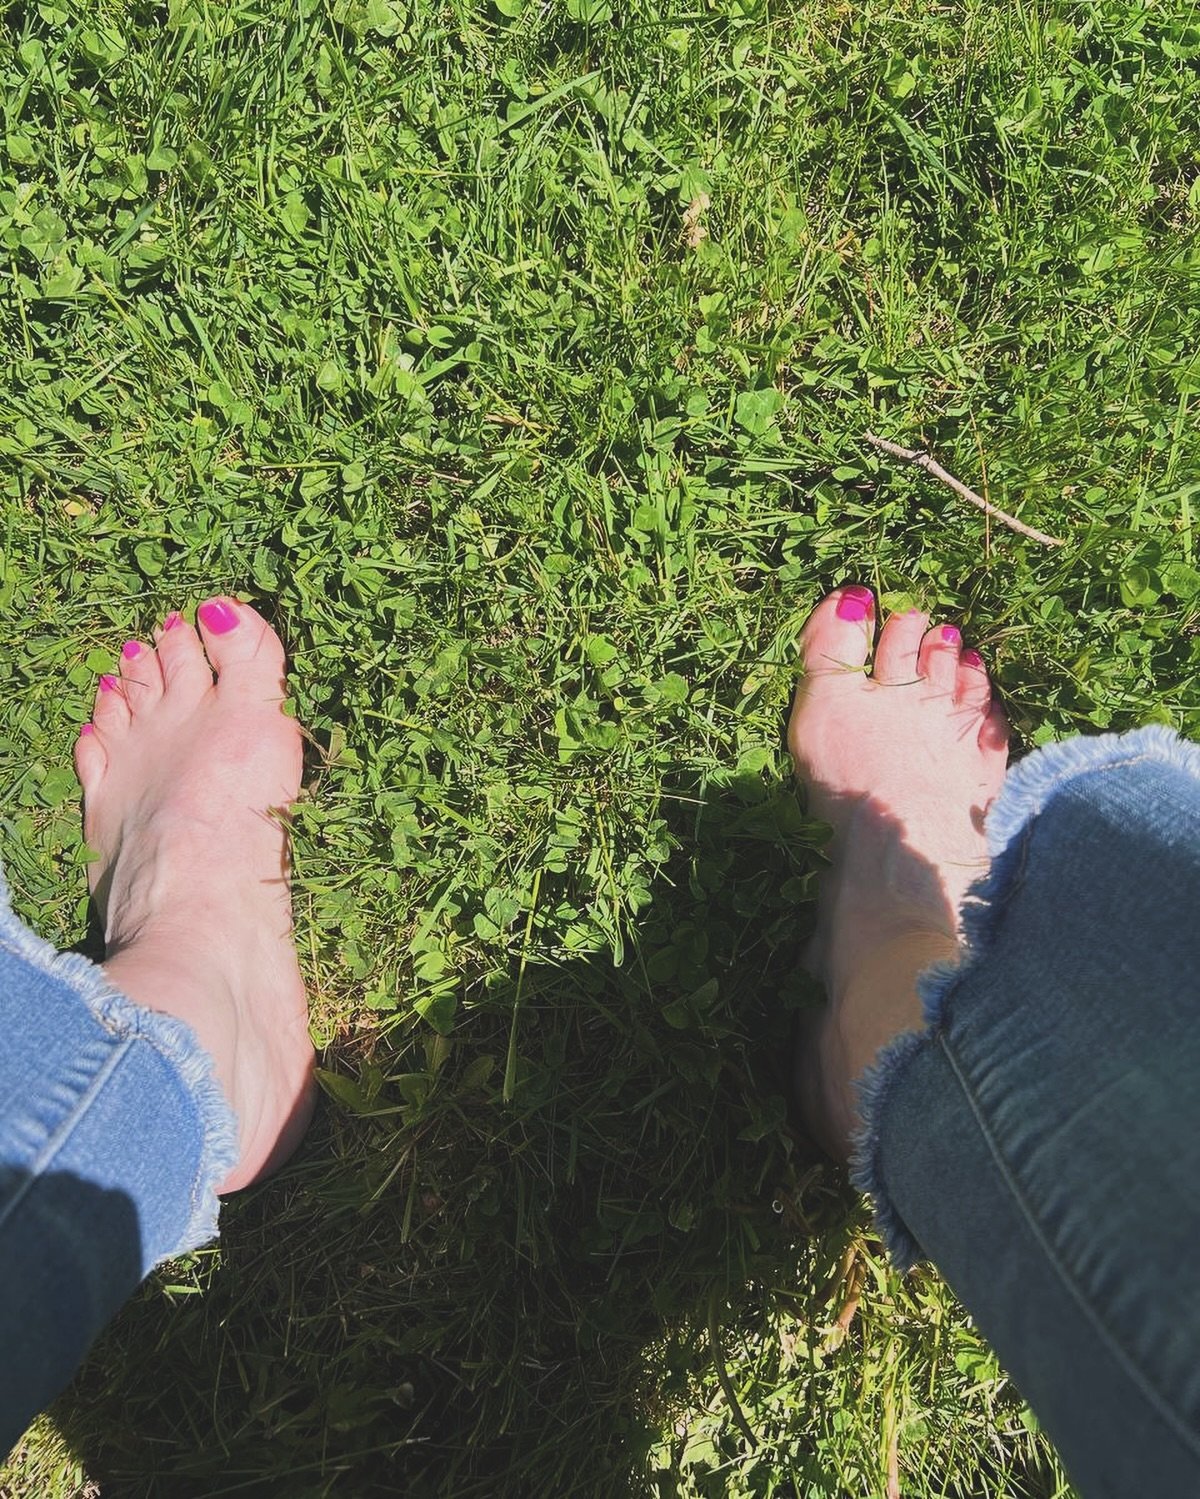 Open Circle explored grounding and Great Mother Descent practice last week. Let&rsquo;s all get our bare feet on the ground and feel our connection with the generous and loving energy of the Earth!

xo, 
Nell 
Open Circle co-facilitator and community